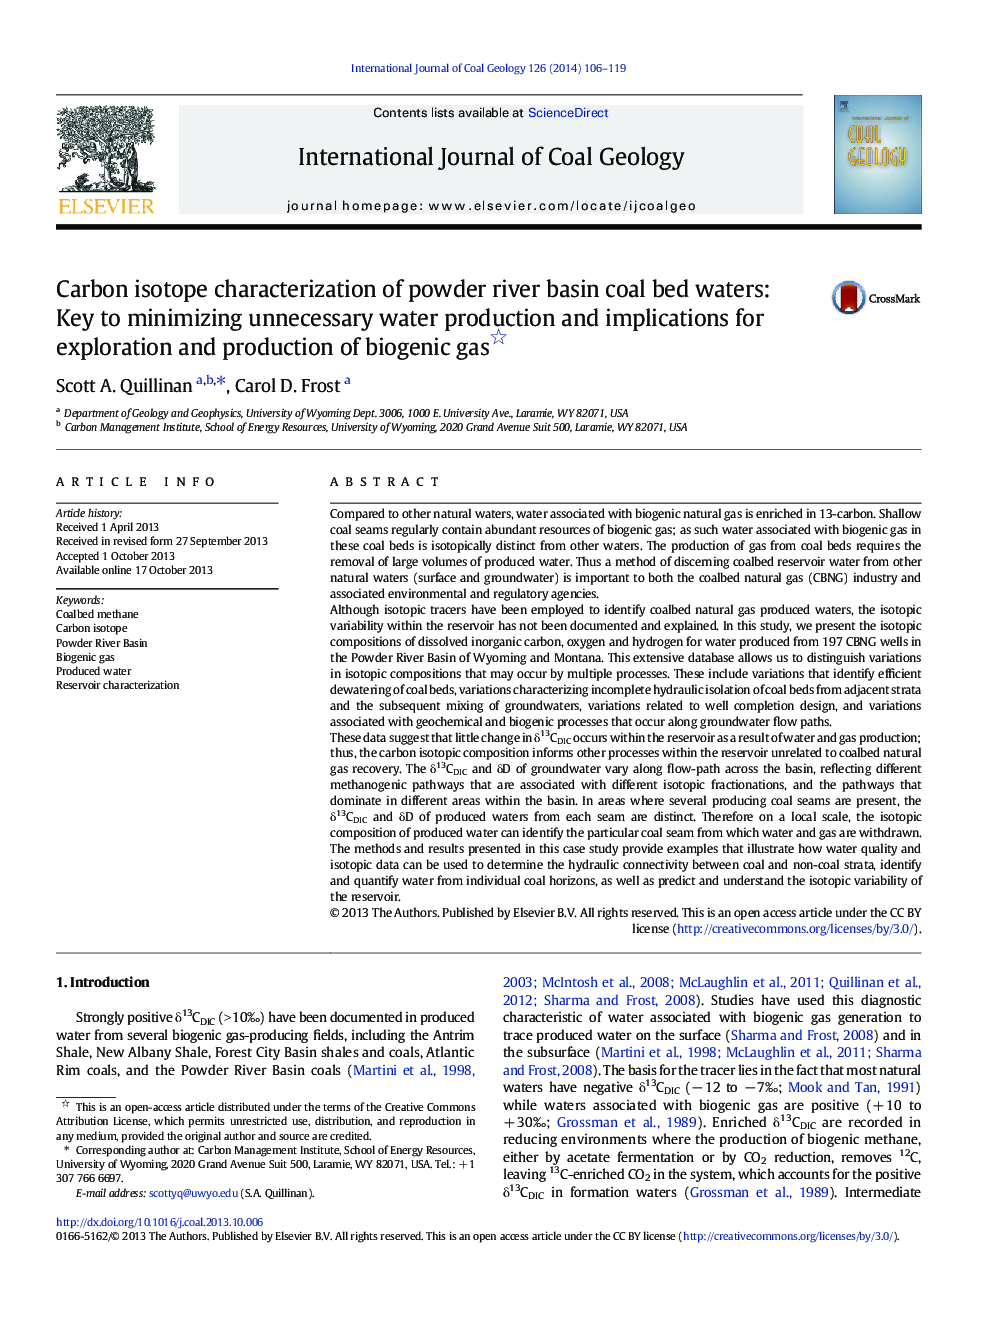 Carbon isotope characterization of powder river basin coal bed waters: Key to minimizing unnecessary water production and implications for exploration and production of biogenic gas